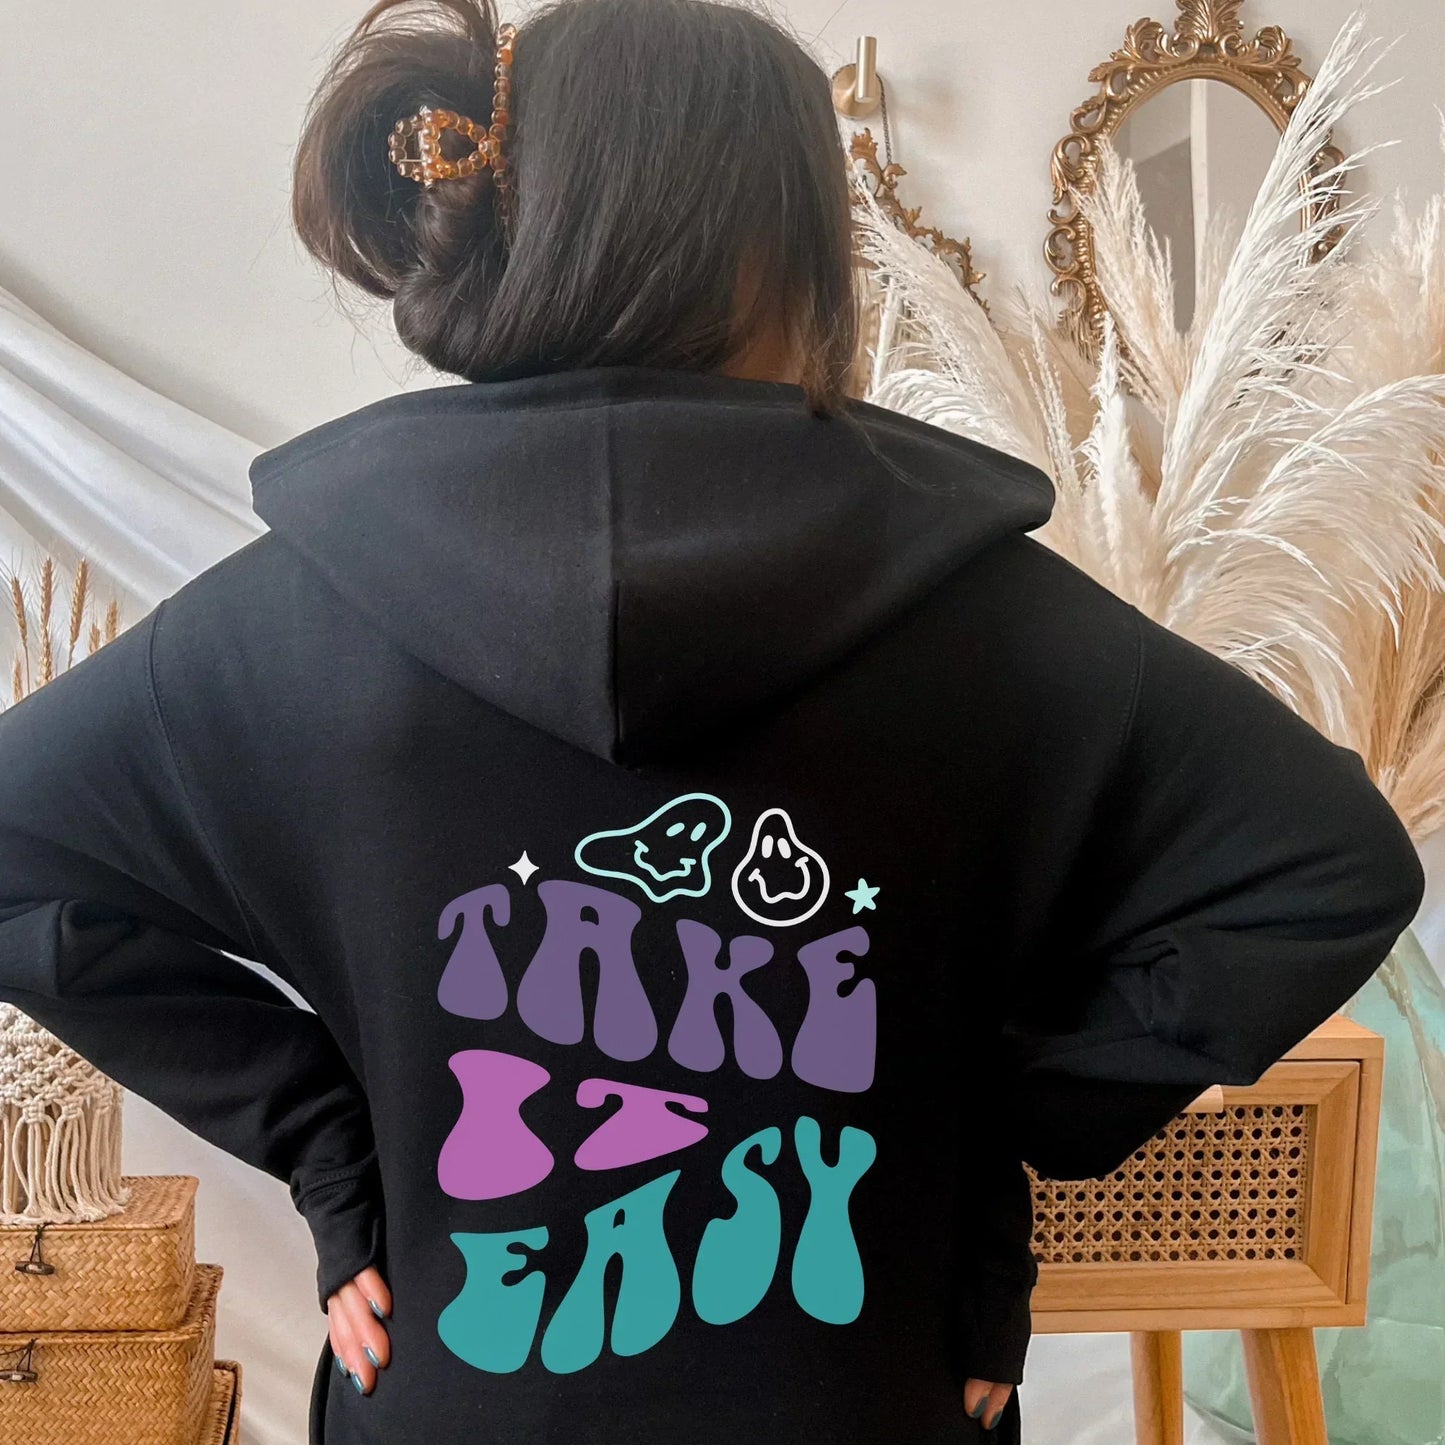 Take It Easy Hoodie, Self Care Trendy Hoodie Sweatshirt, Positive Thoughts Hoodie, Gift for Her, Positive Quote Hoodie, Kindness Shirt HMDesignStudioUS